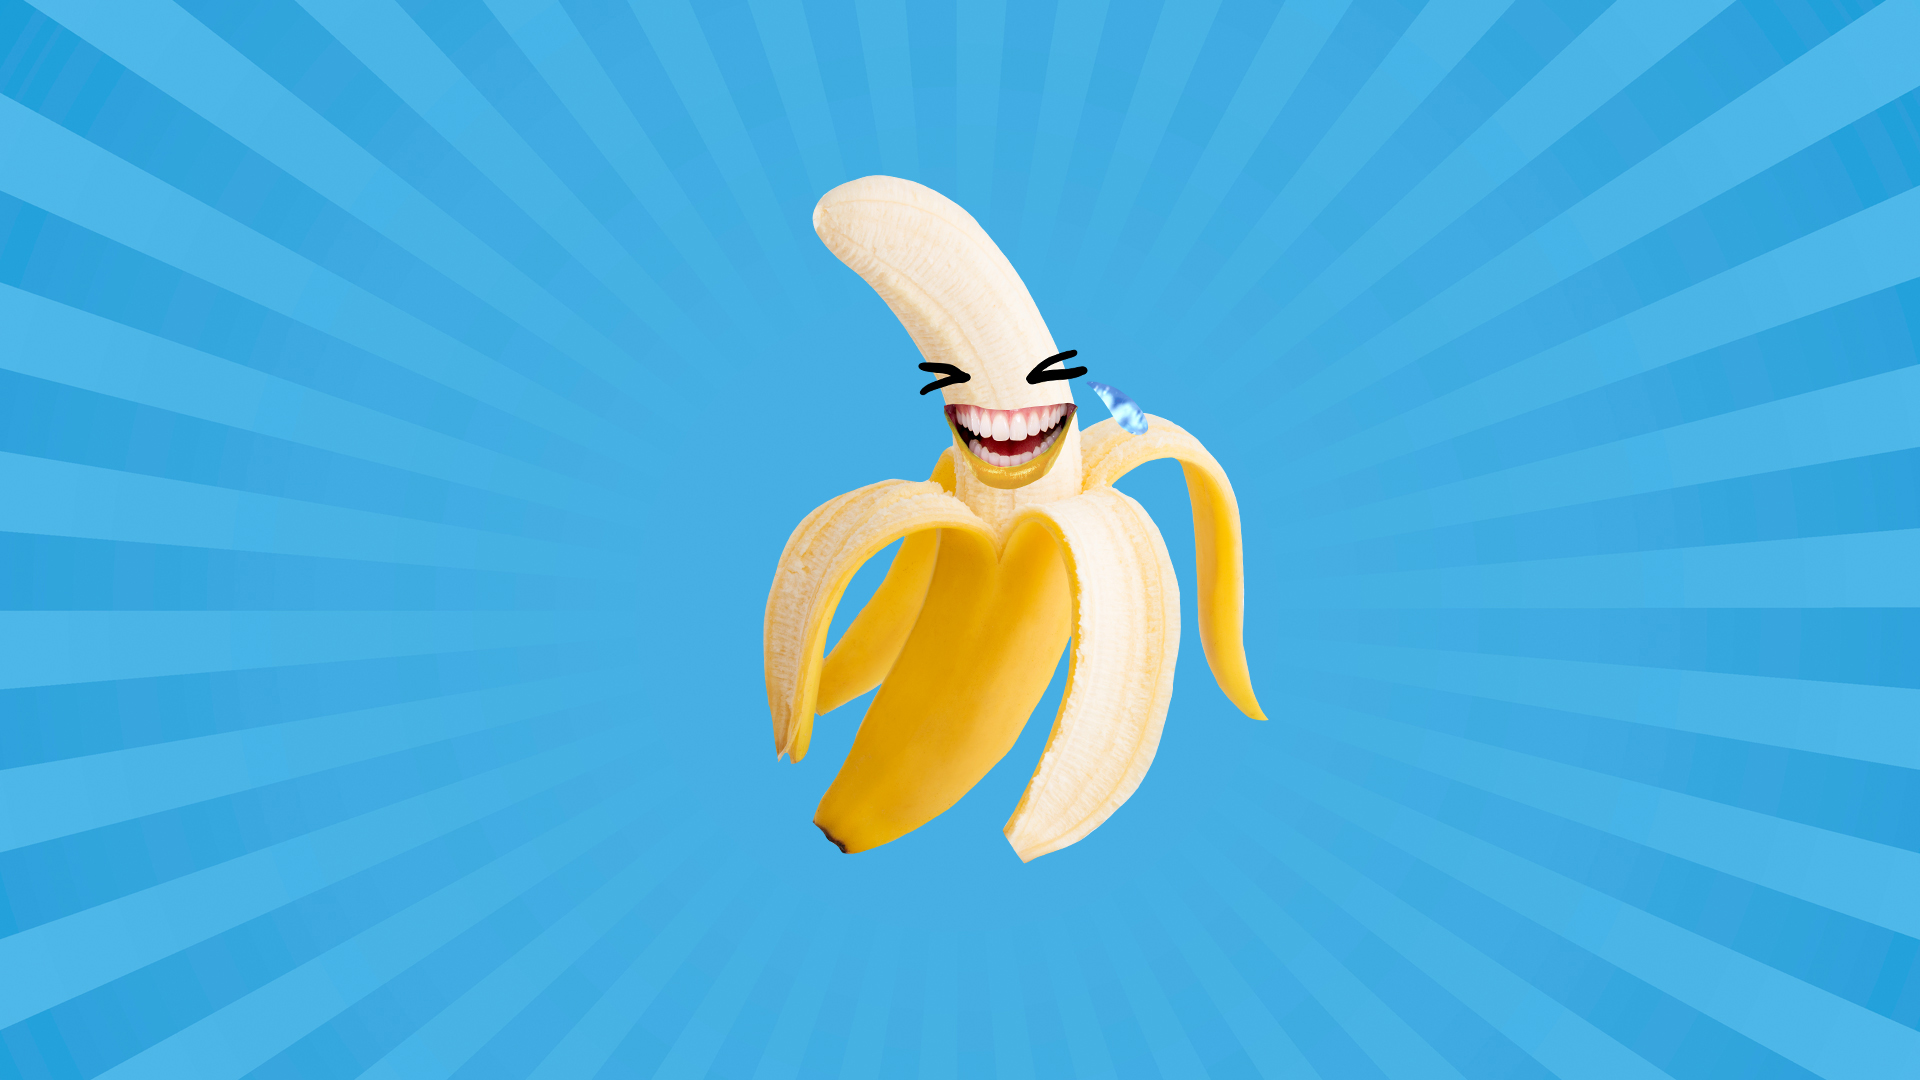 A laughing banana in front of a blue background